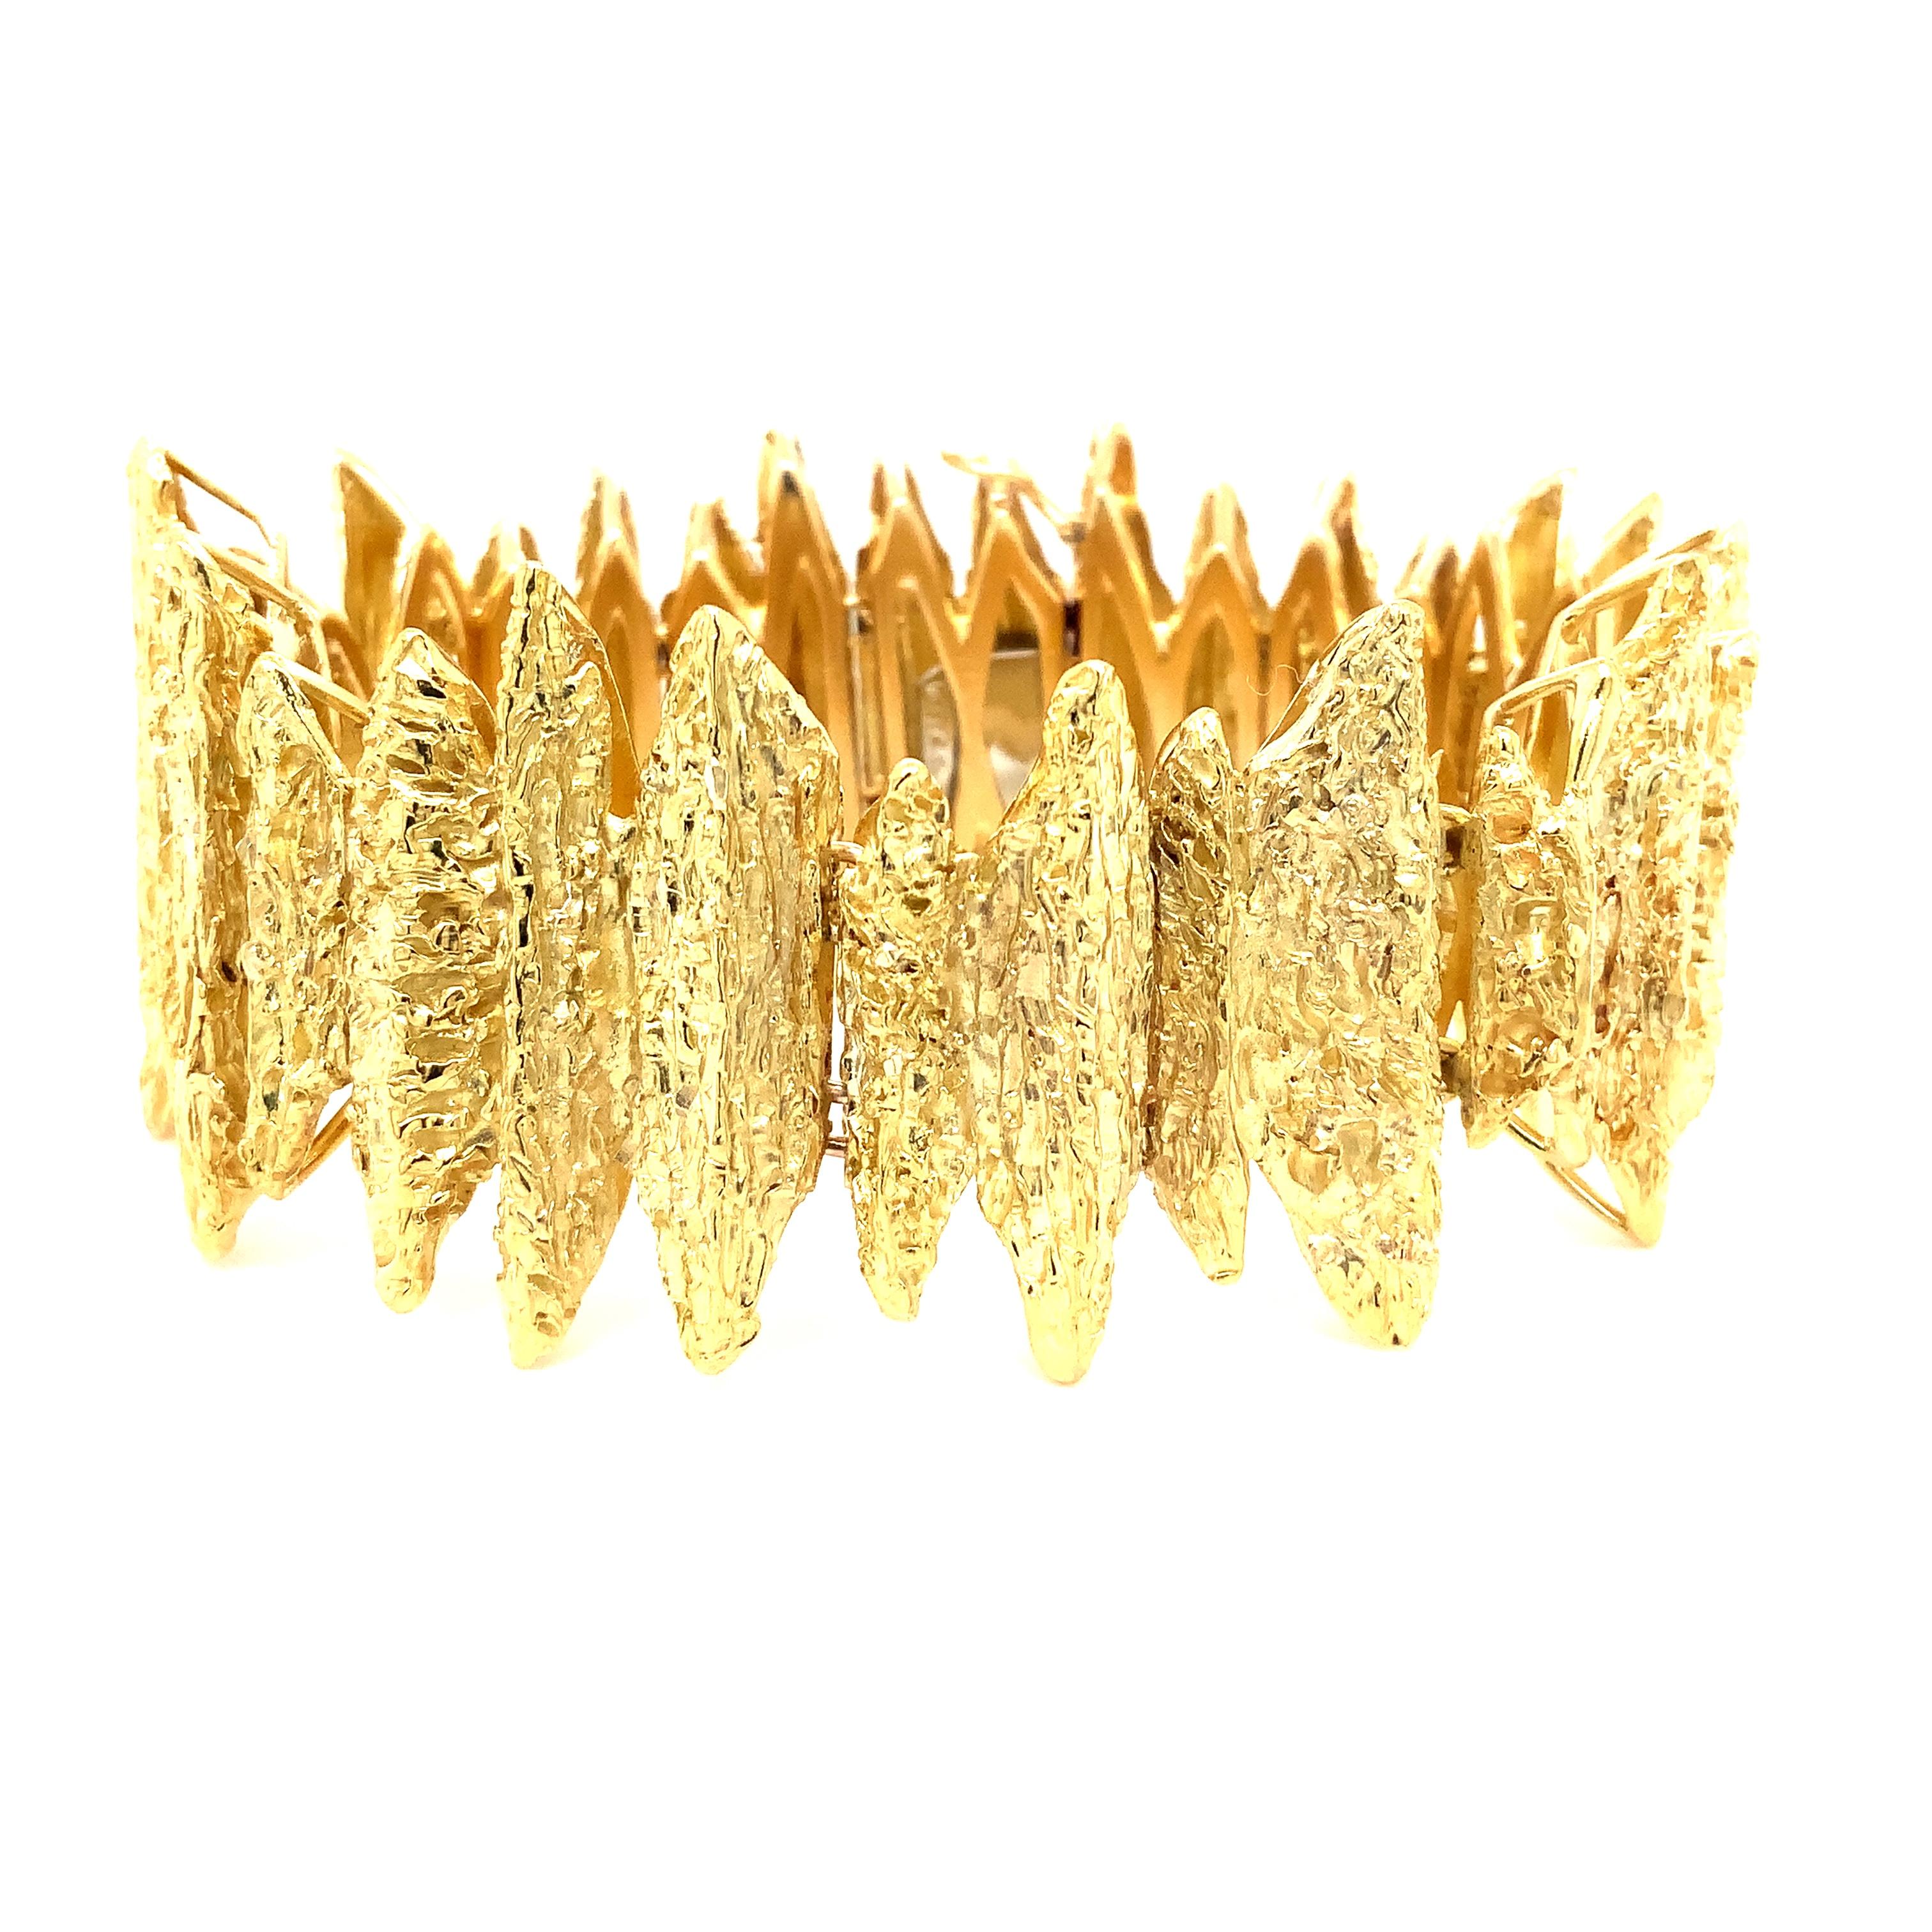 This one-of-a-kind bracelet is expertly crafted from 18-karat green gold, with an elegant organic texture that stands out. A bold and unique design, featuring textured abstract links, makes this Italian-made bracelet a show-stopping accessory.